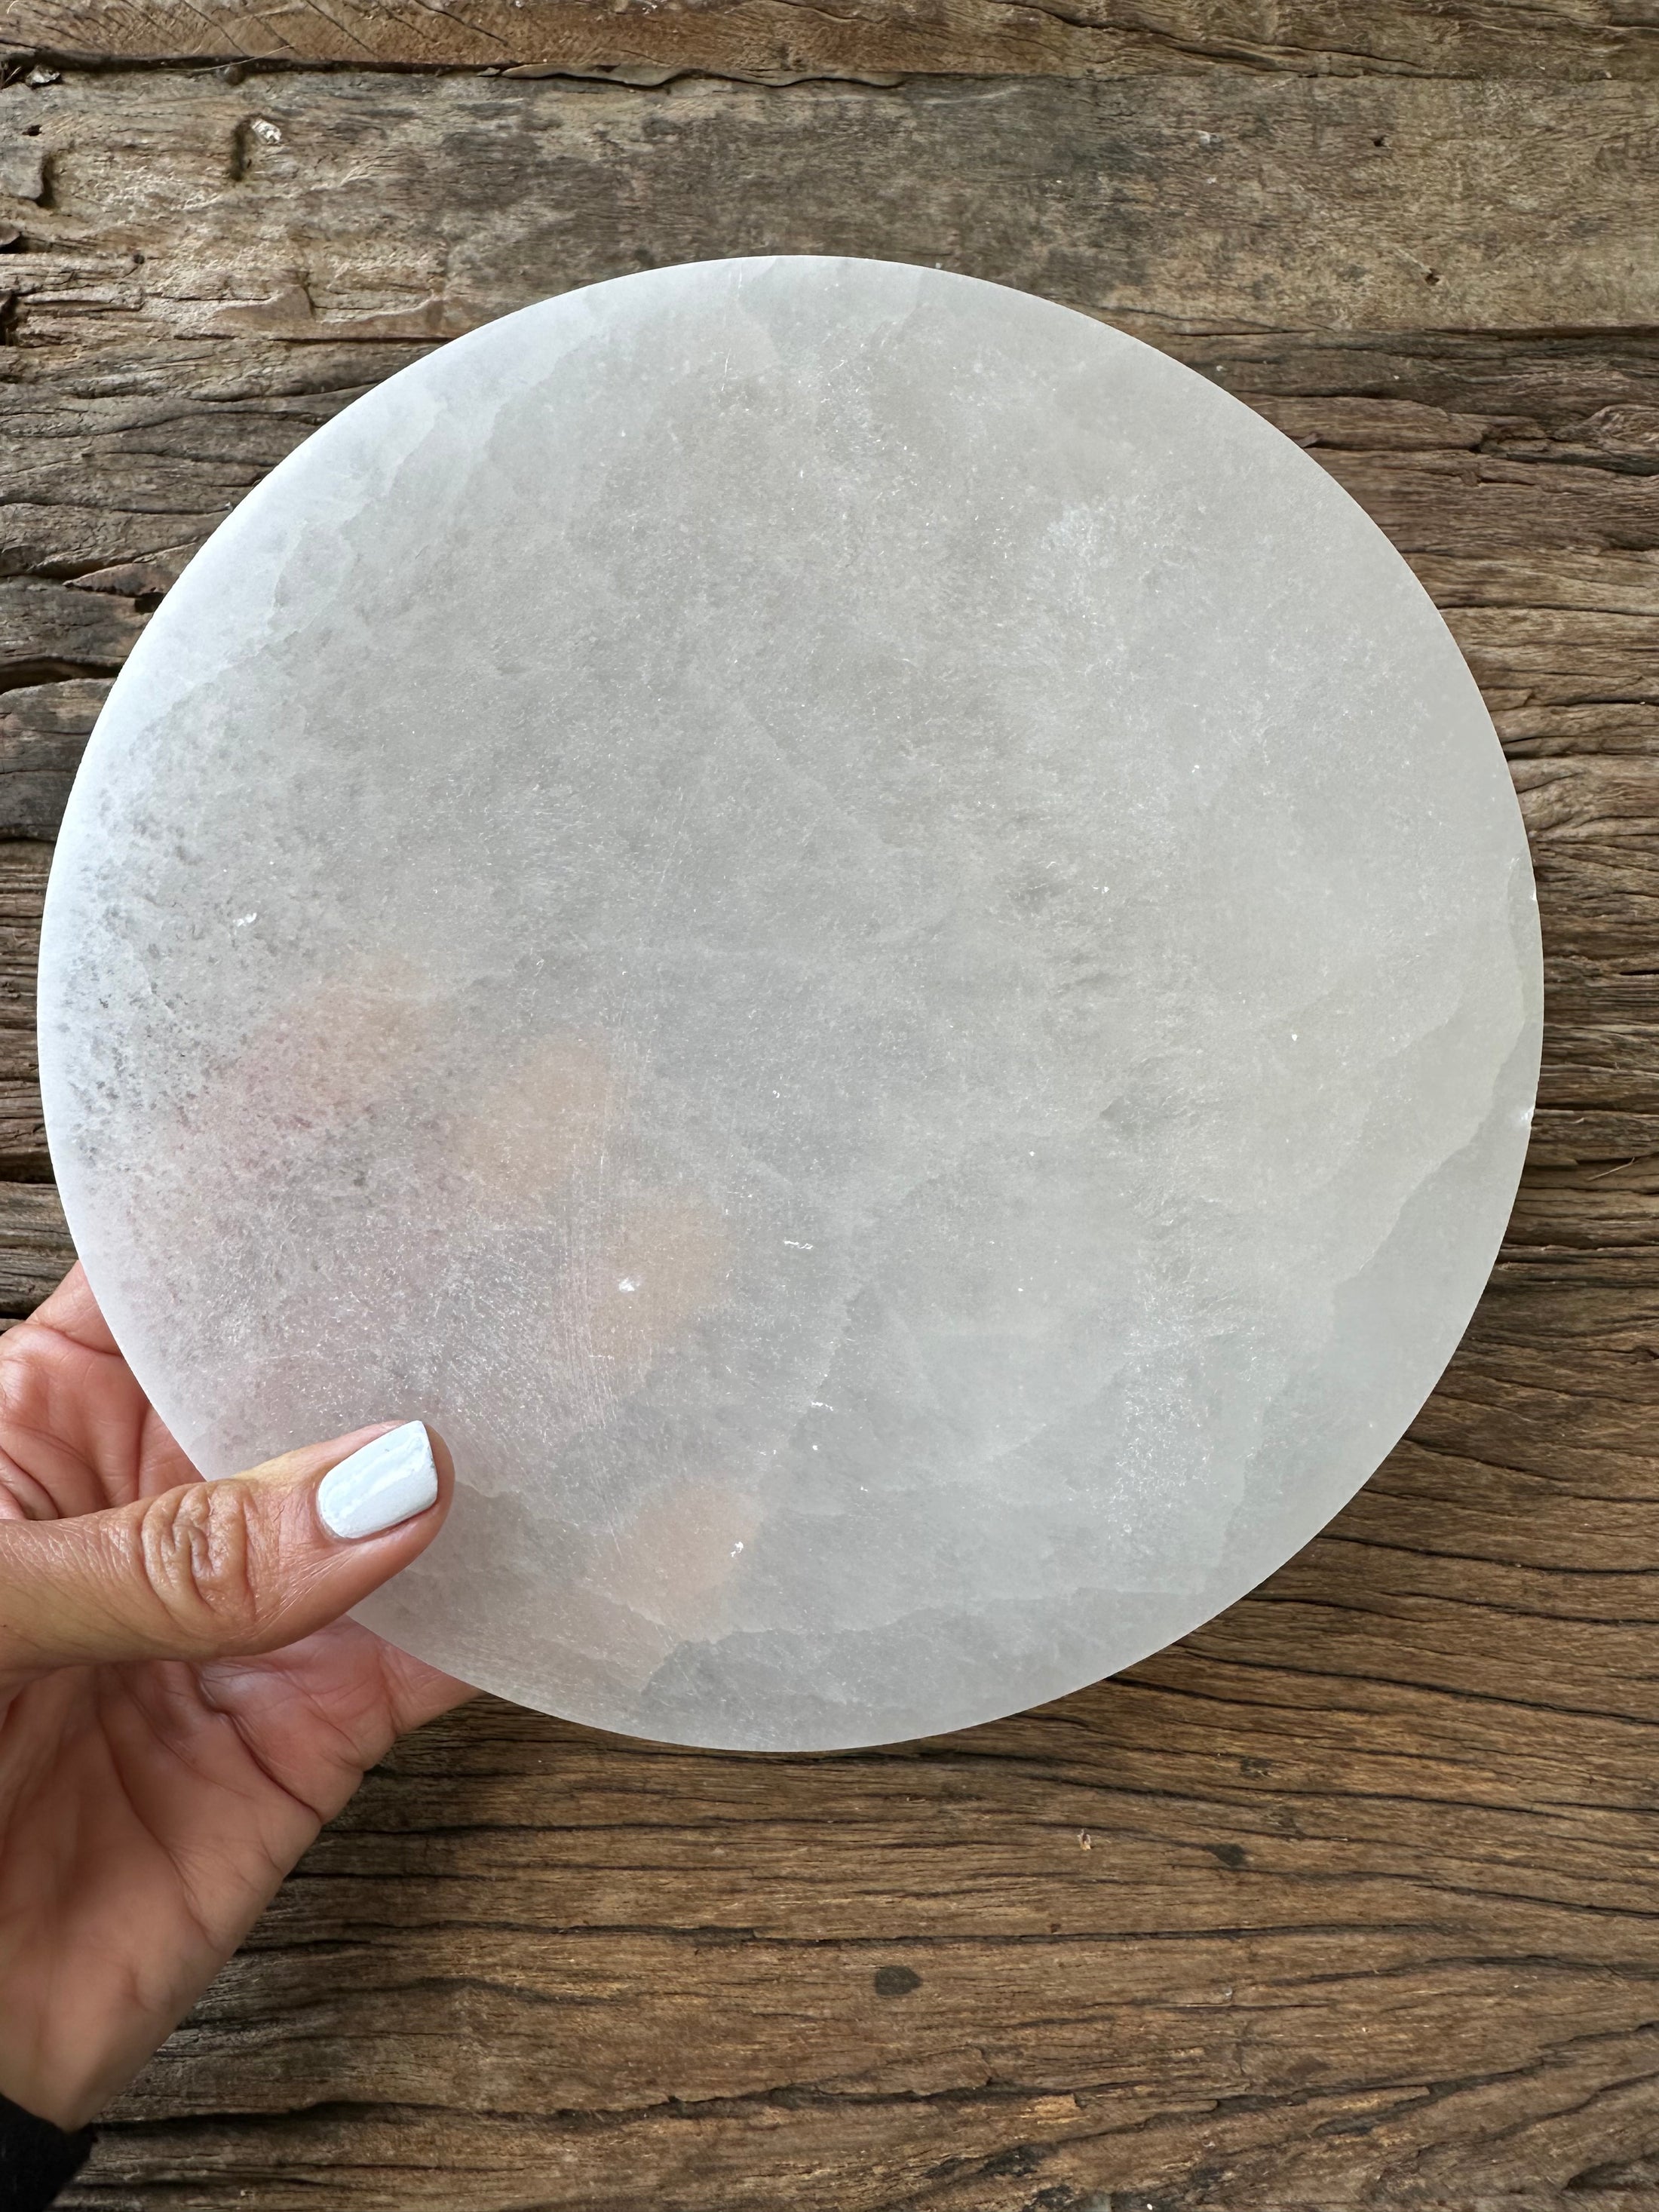 BIG 8" Diameter, Selenite Charging Plate, Ethically Mined